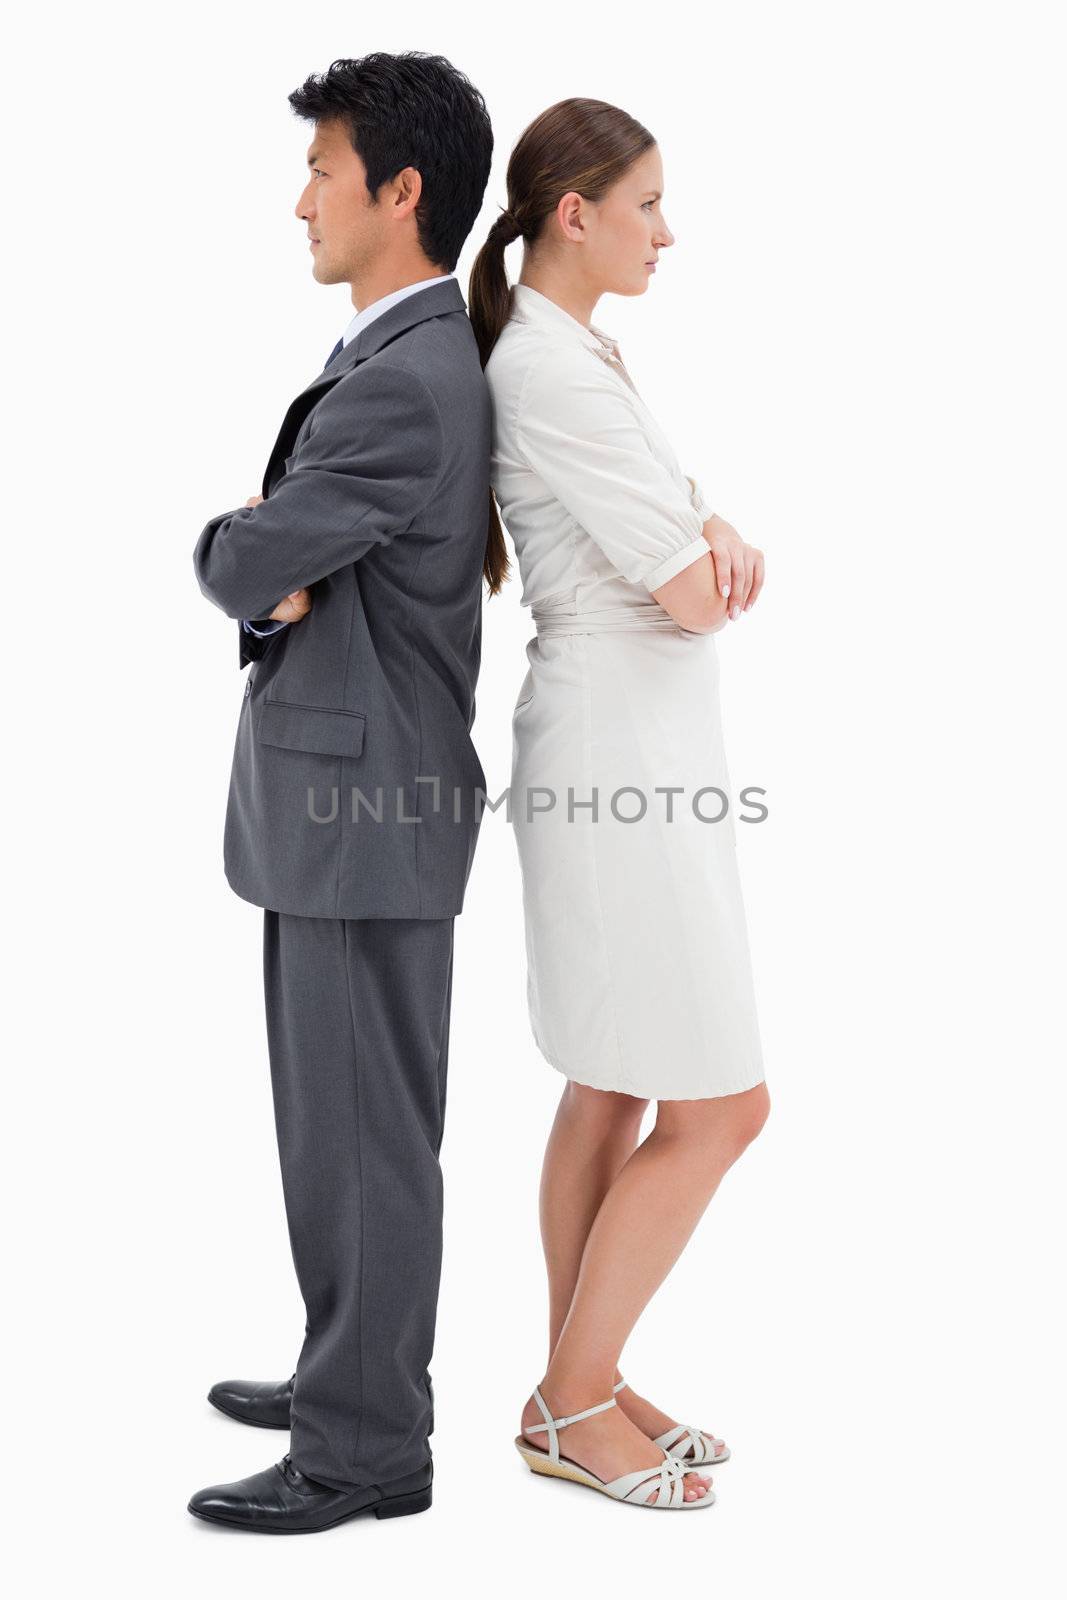 Portrait of serious business people standing back to back against a white background